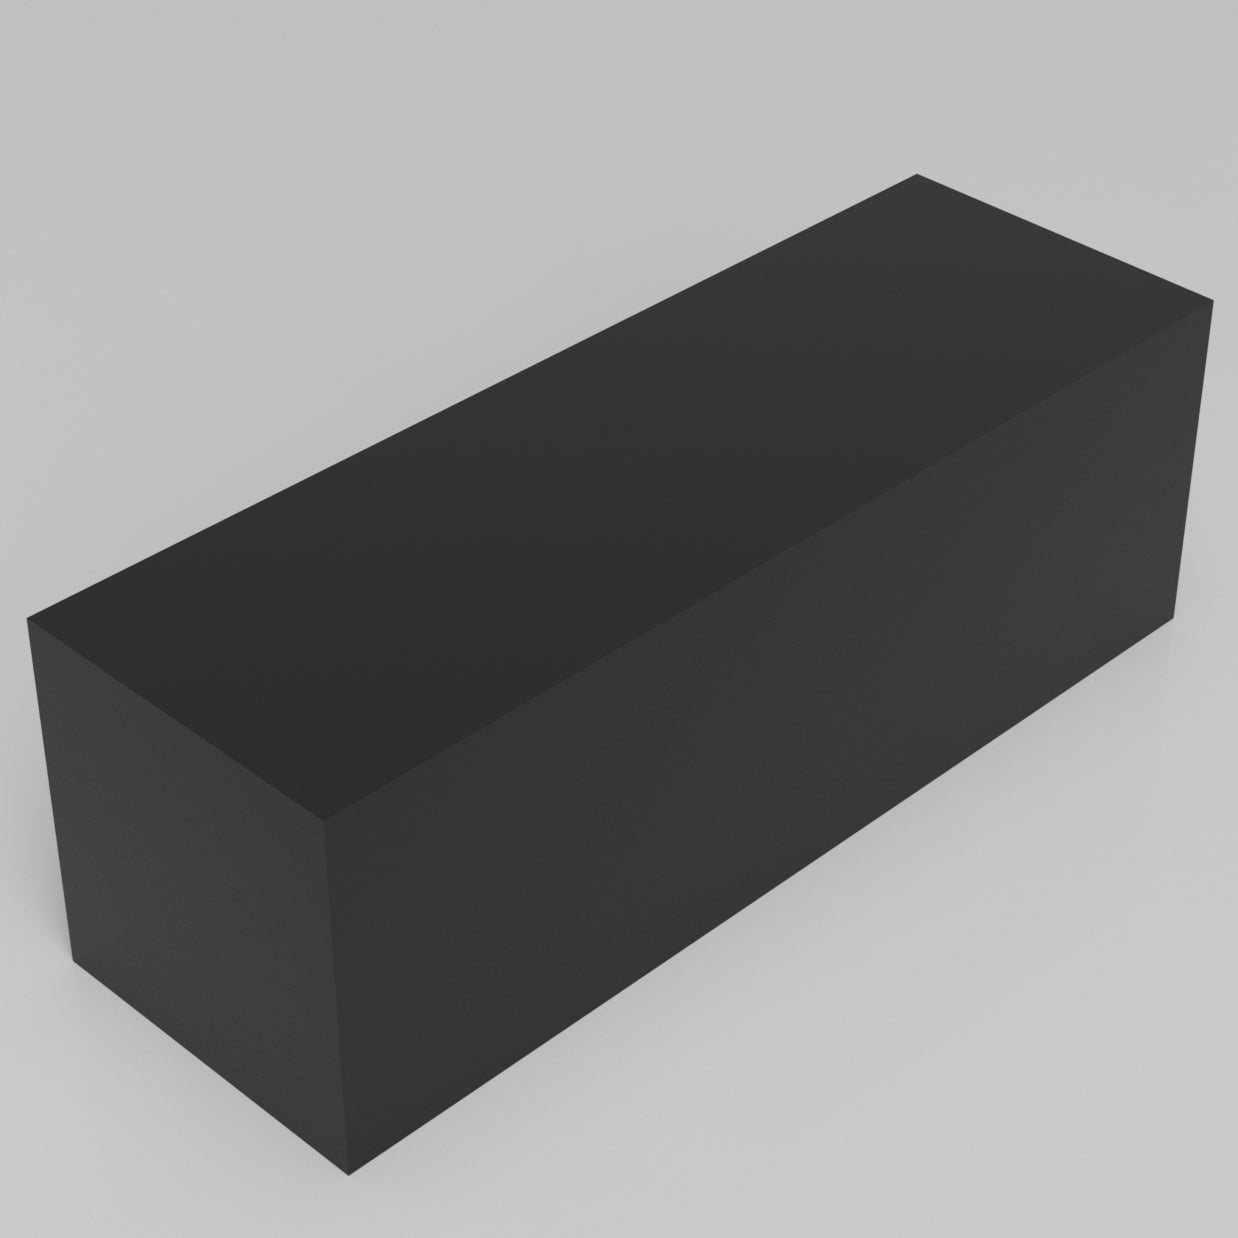 Machinable Wax Rectangular Block Front View 4 Inch by 4 Inch by 12 Inch